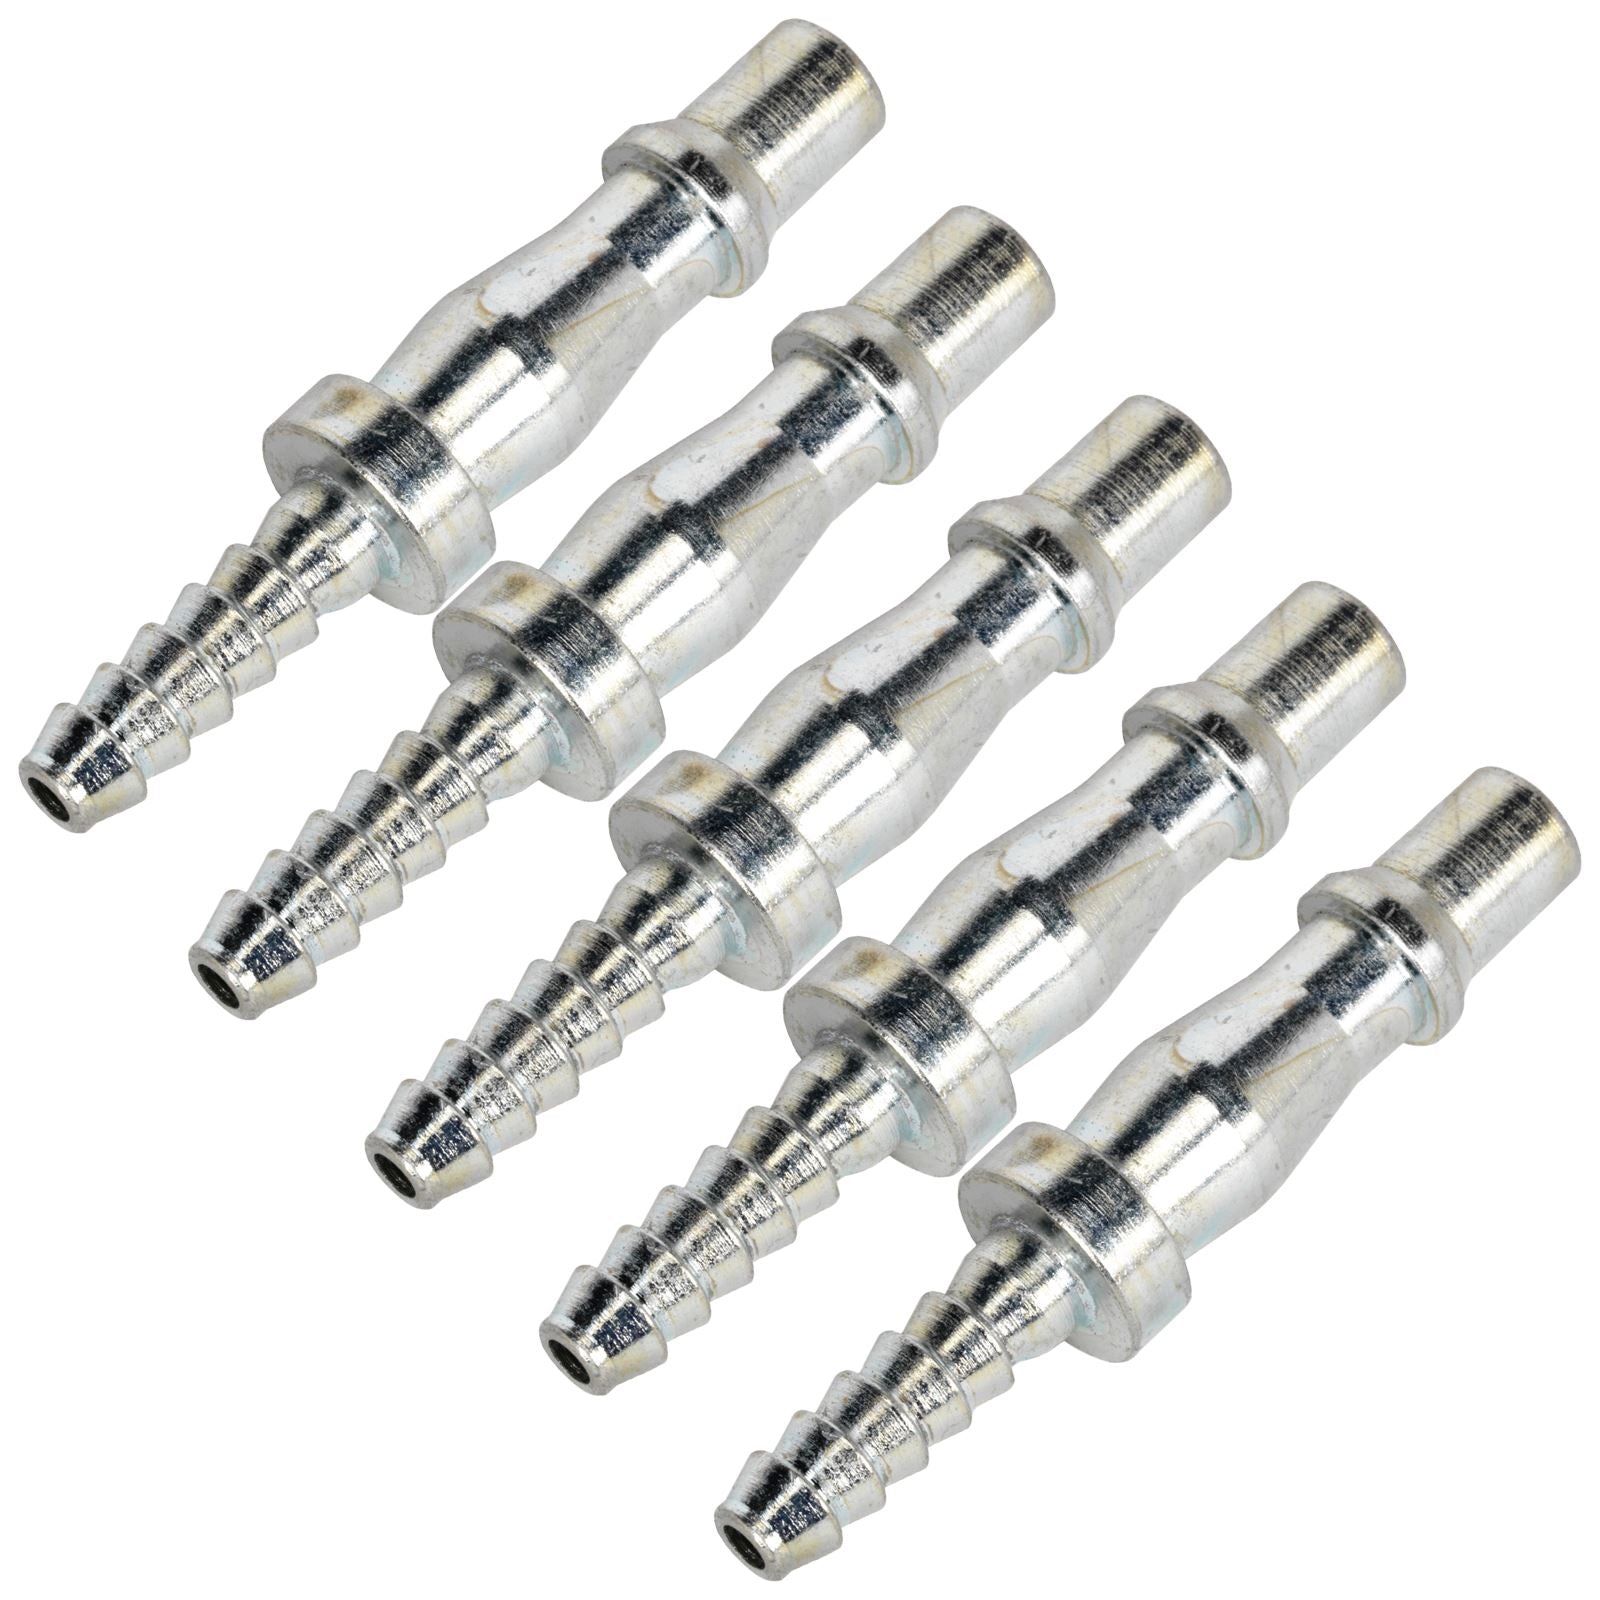 Sealey 5 Pack Hose End Tailpiece Adaptor Bayonet 3/16" Bore Connector Coupler